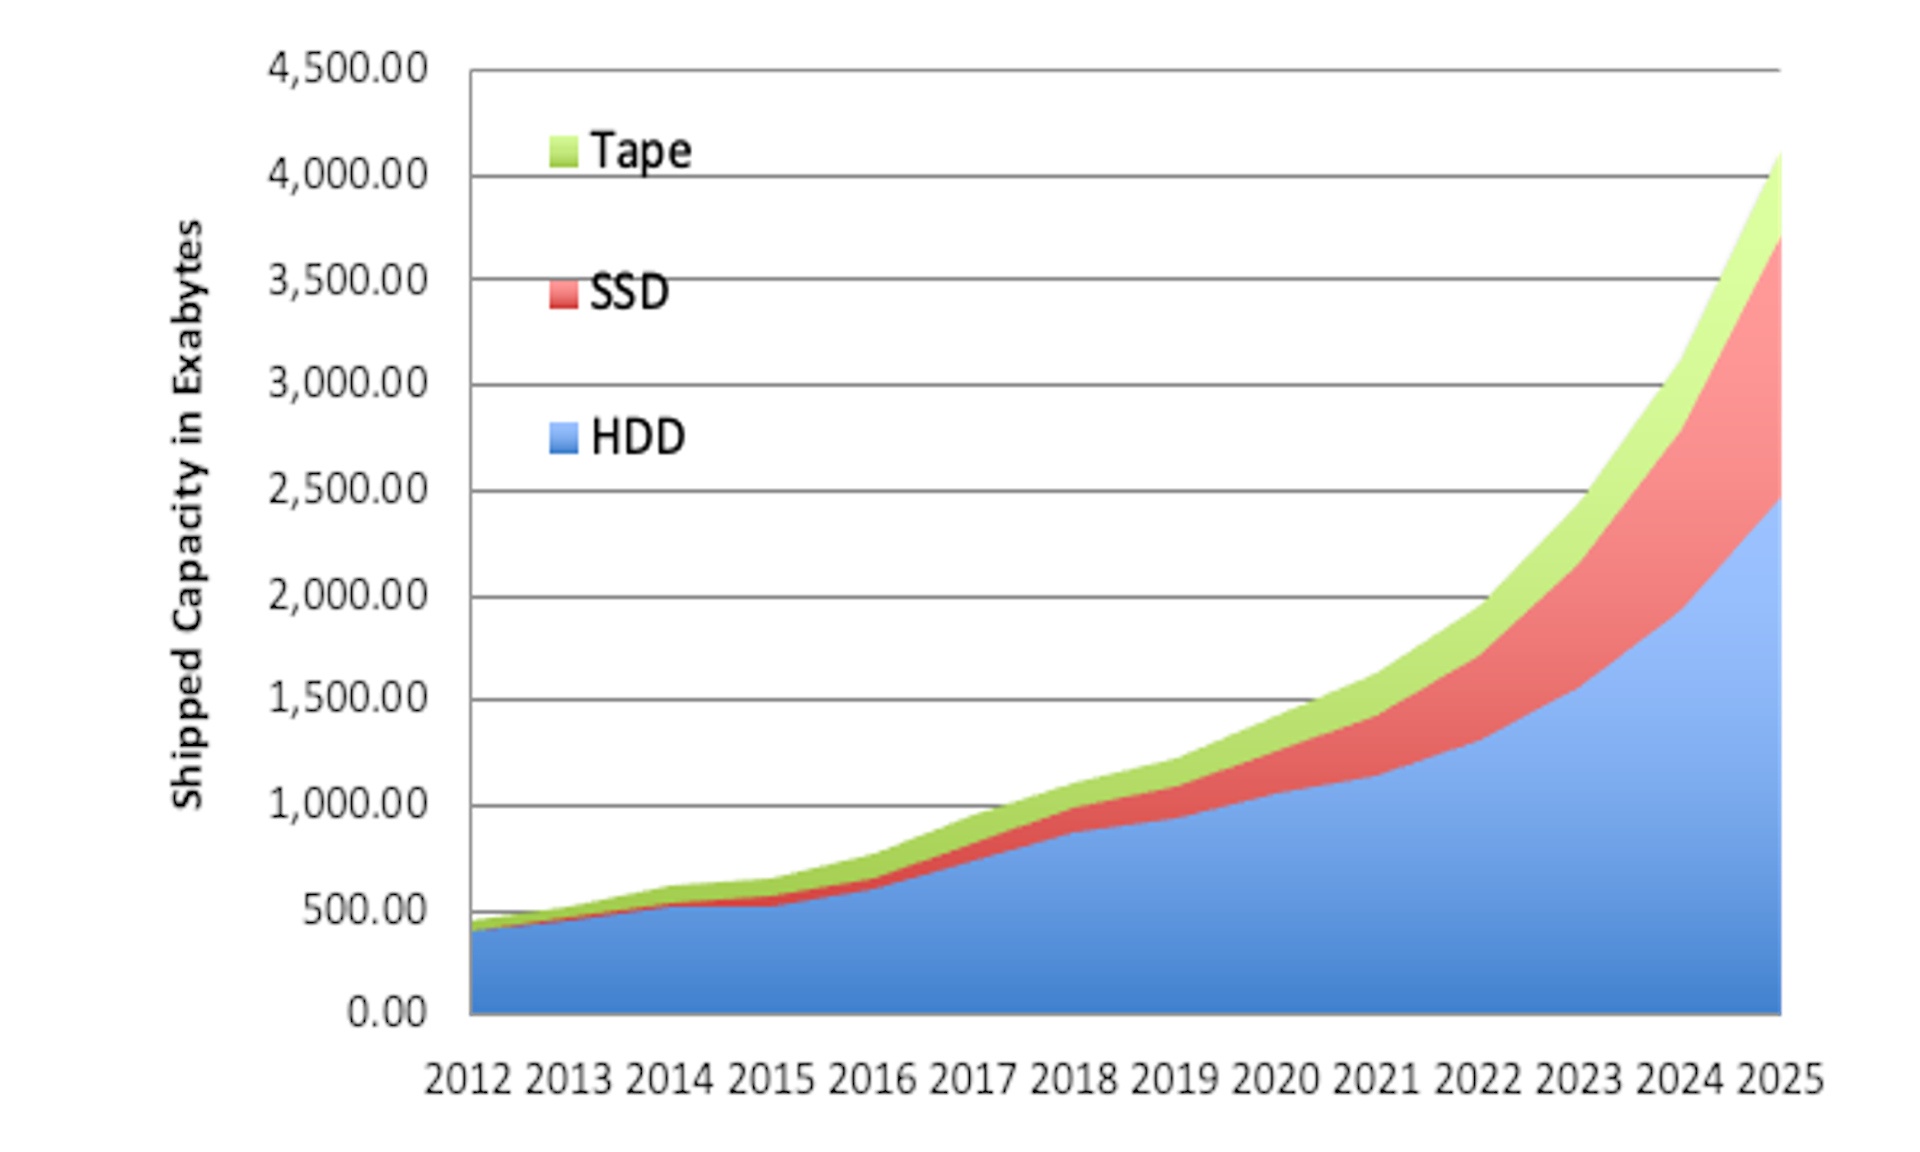 Chart: Annual capacity shipments for tape, HDD, SSD